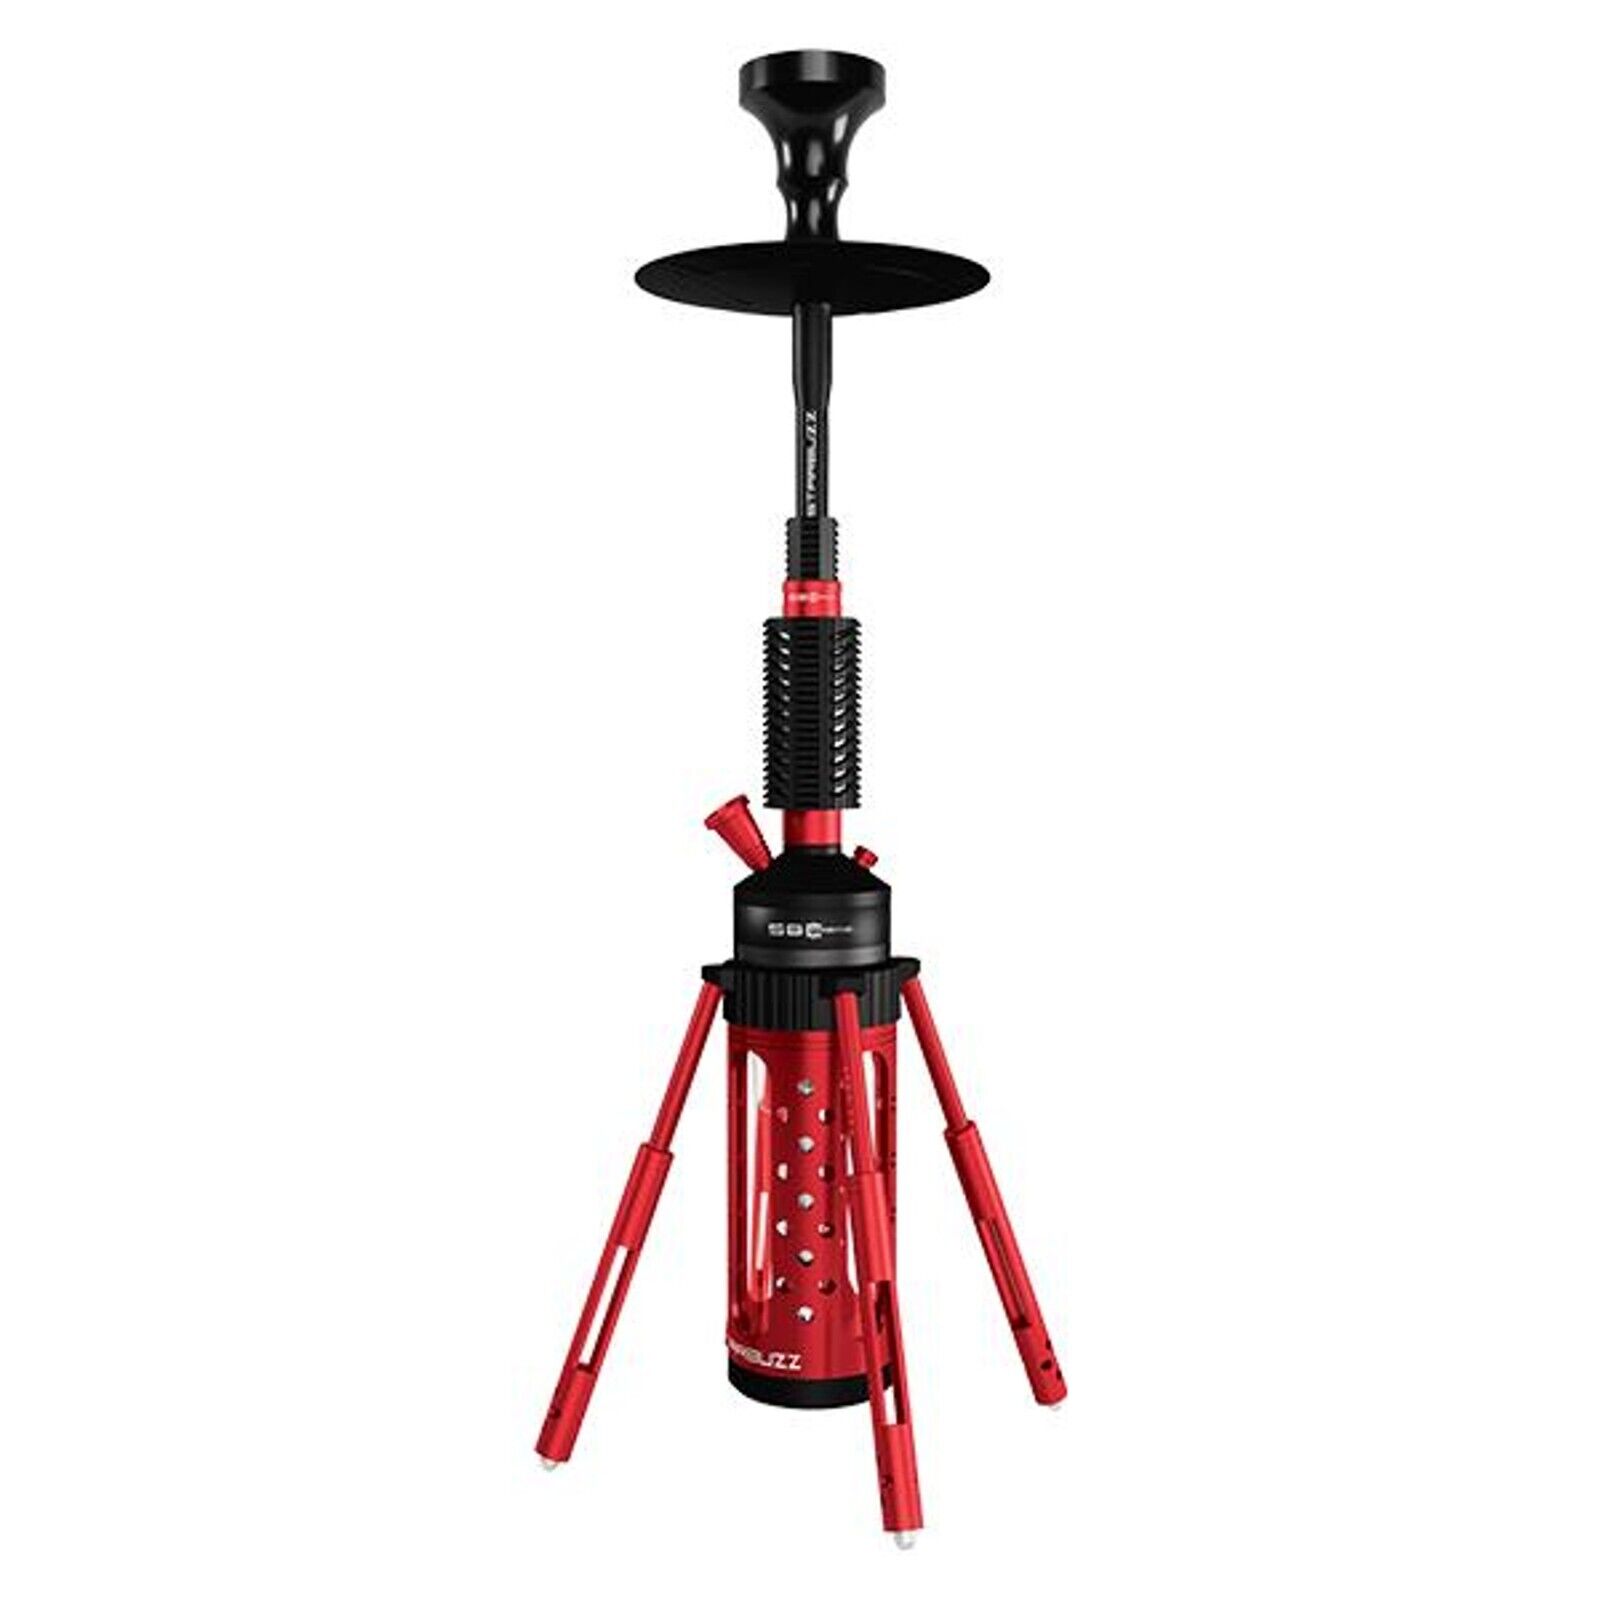 Starbuzz Carbine RED Hookah Rotating, Full Kit , Includes hose, Bowl + Gifts